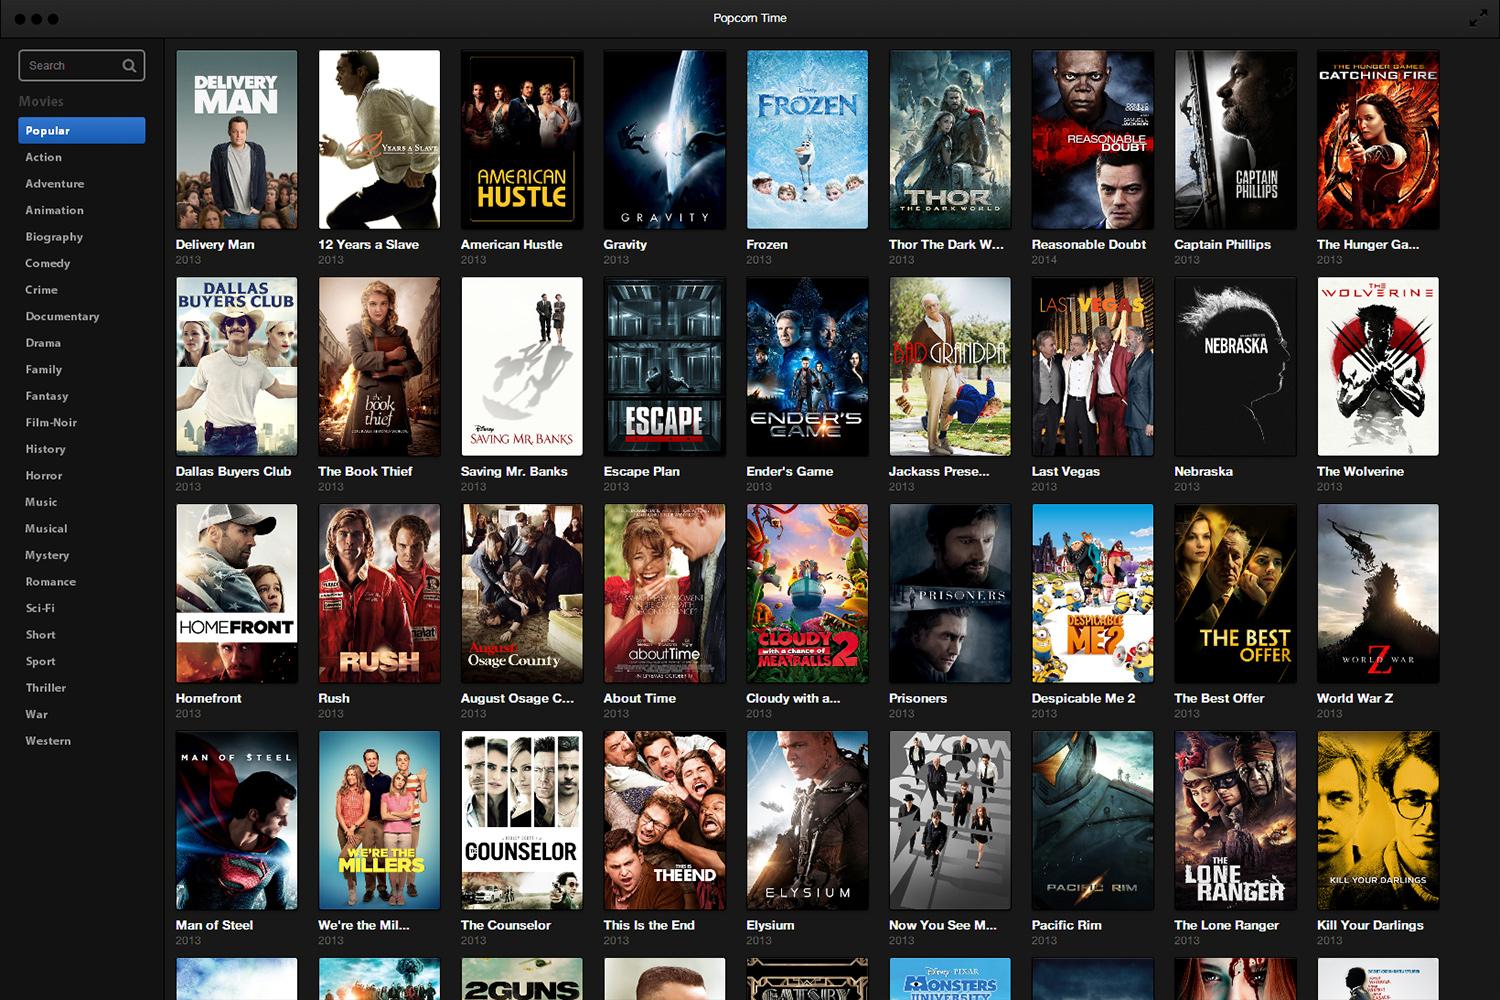 ISPs forced to block Popcorn Time by court orders